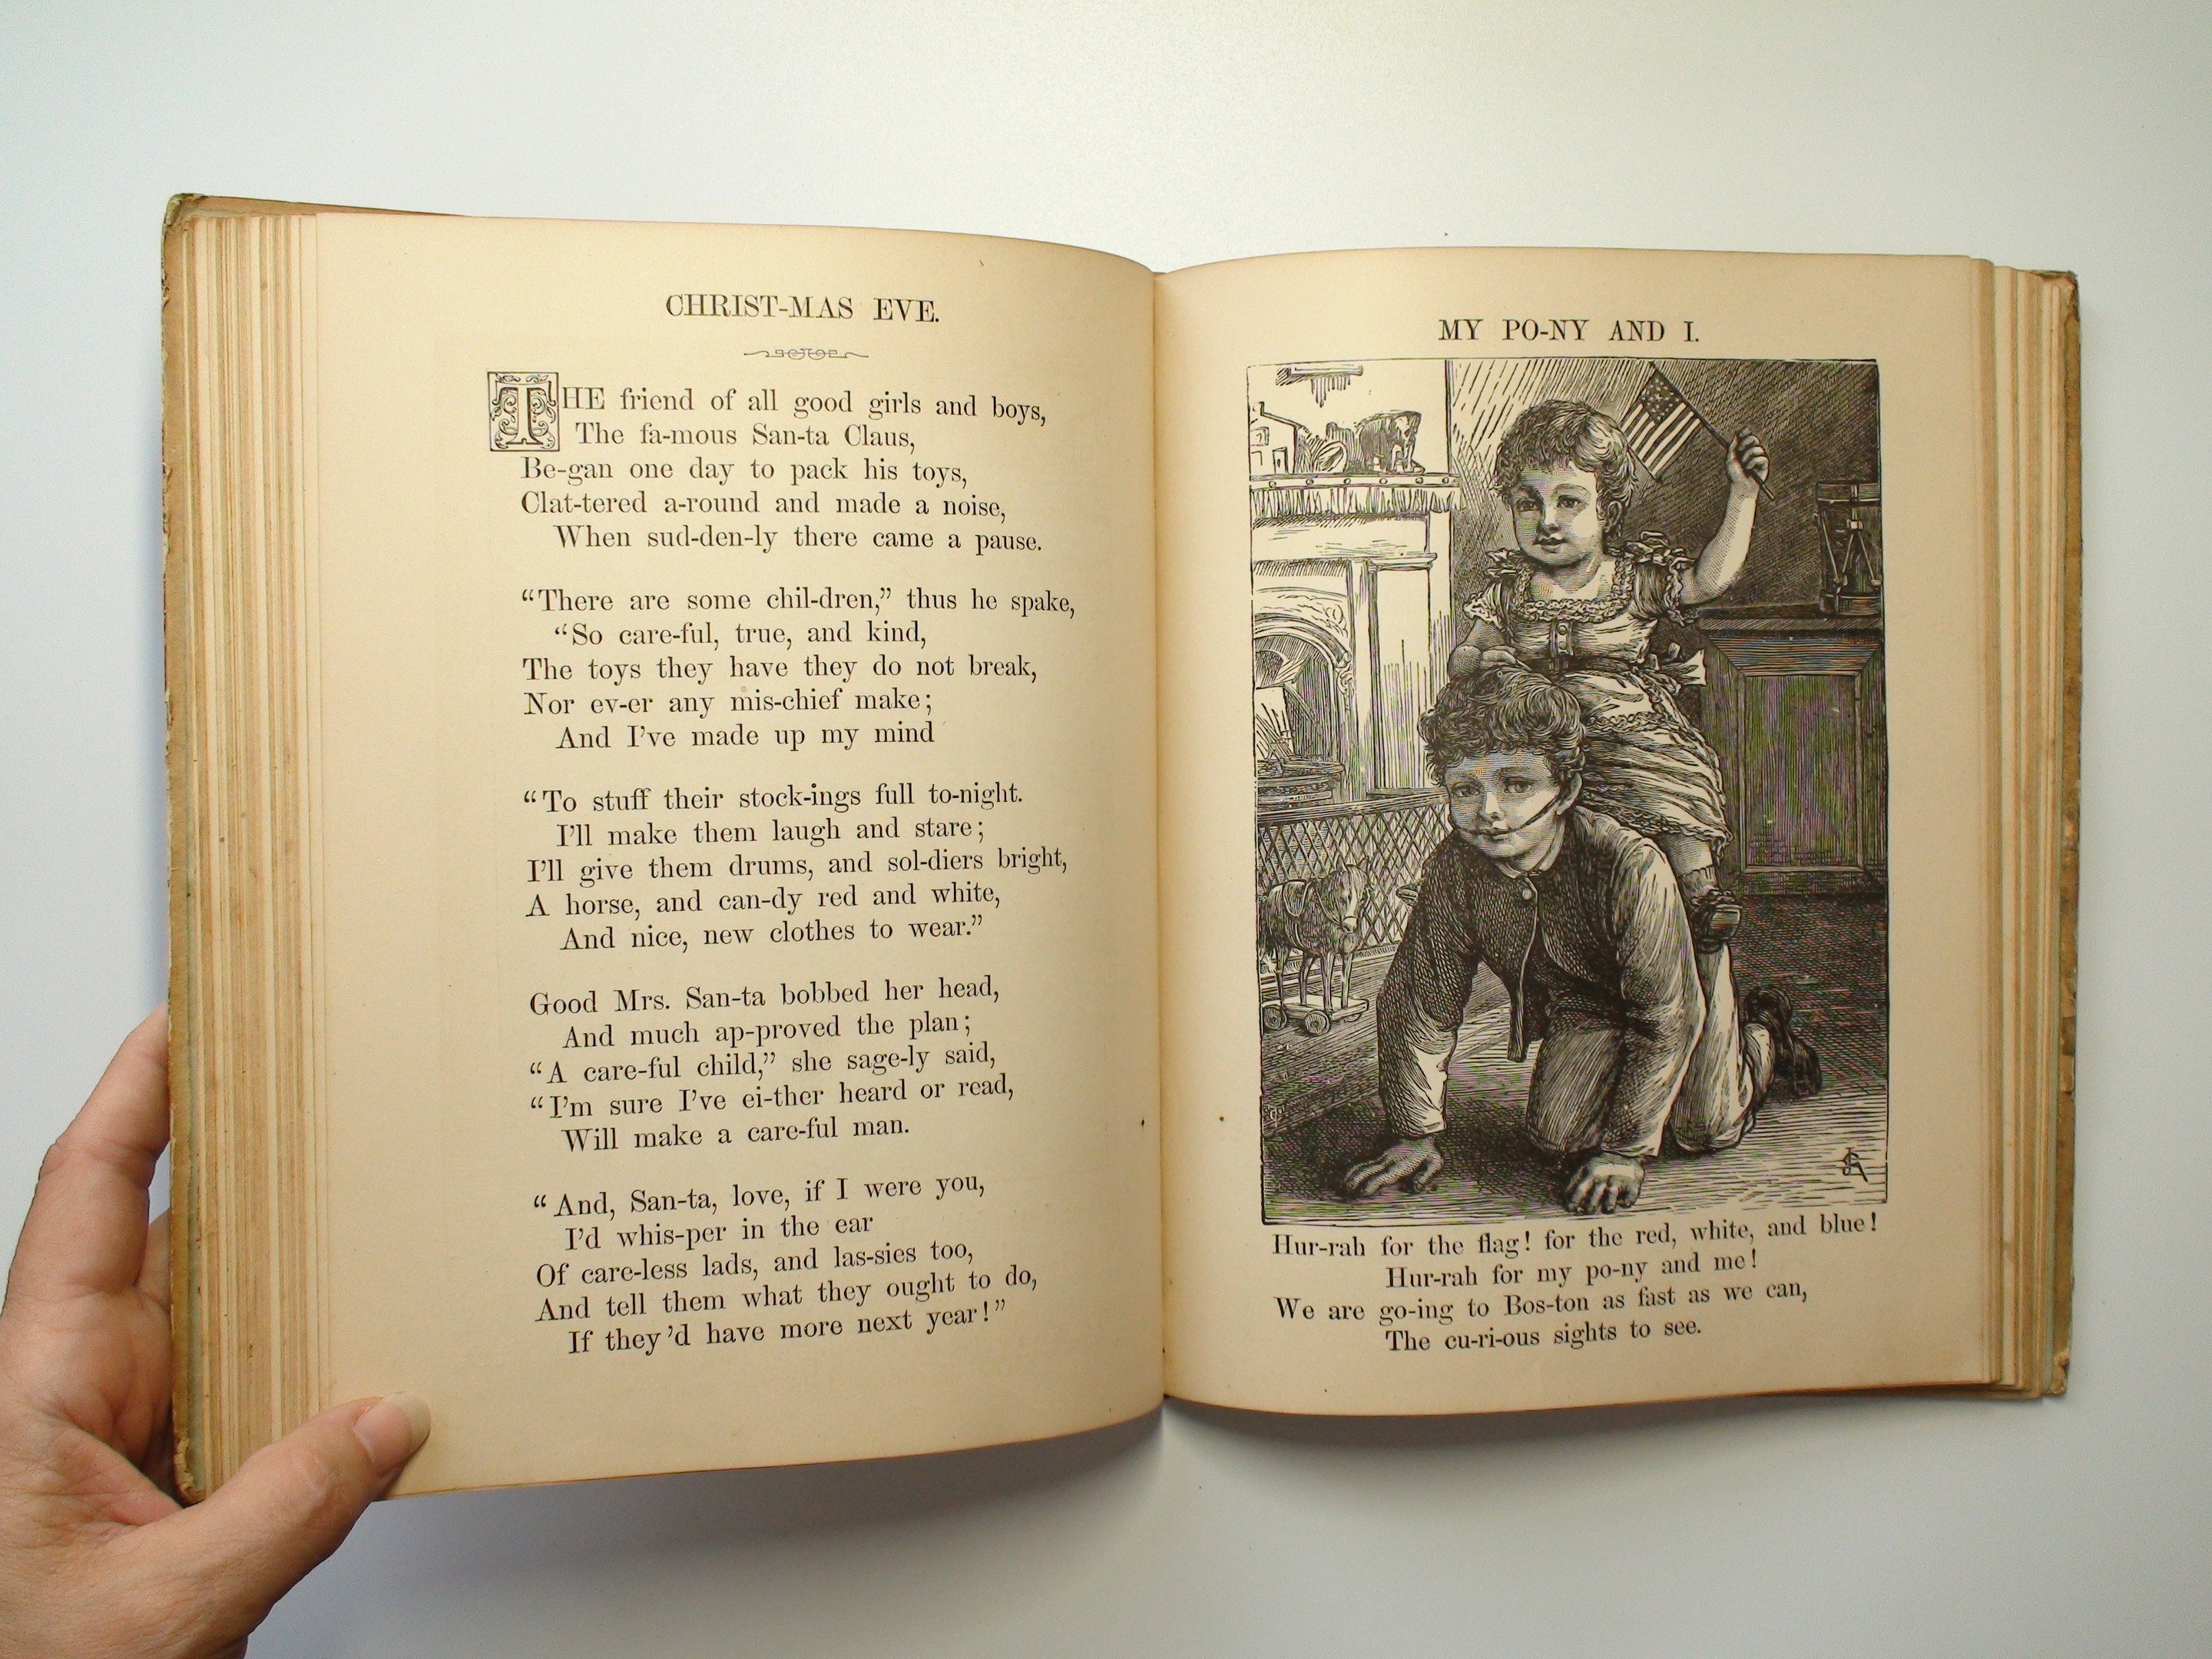 Baby Ways, Pictures, Stories, and Rhymes, Children's Book, Illustrated, 1881